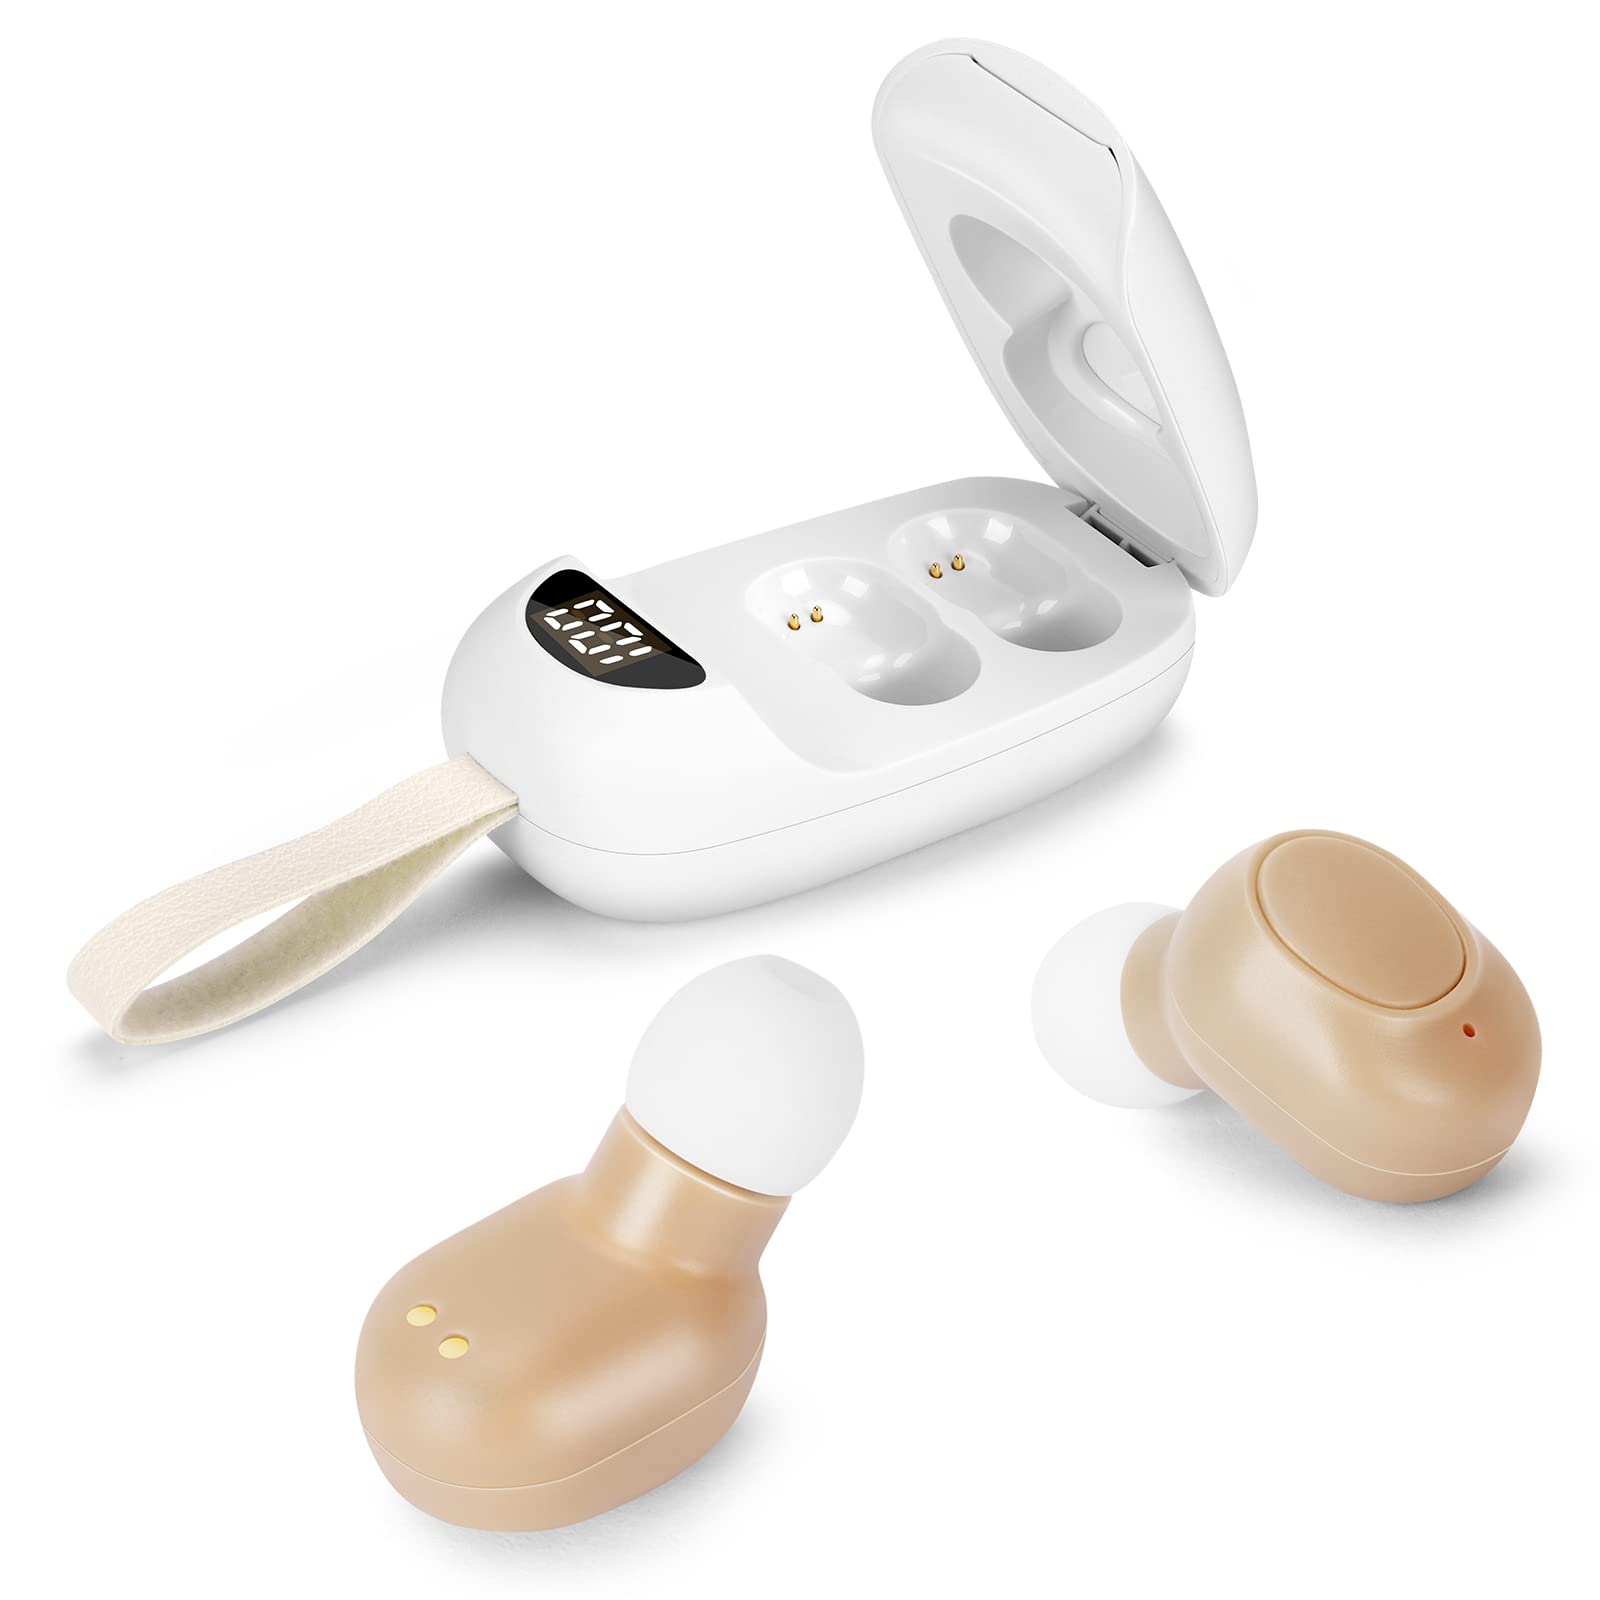 Rechargeable Hearing Aids for Seniors & Adults with Noise Cancelling,Digital Hearing Amplifier with Into Ear No Squealing,Magnetic Contact Charging Box with LED Power Display